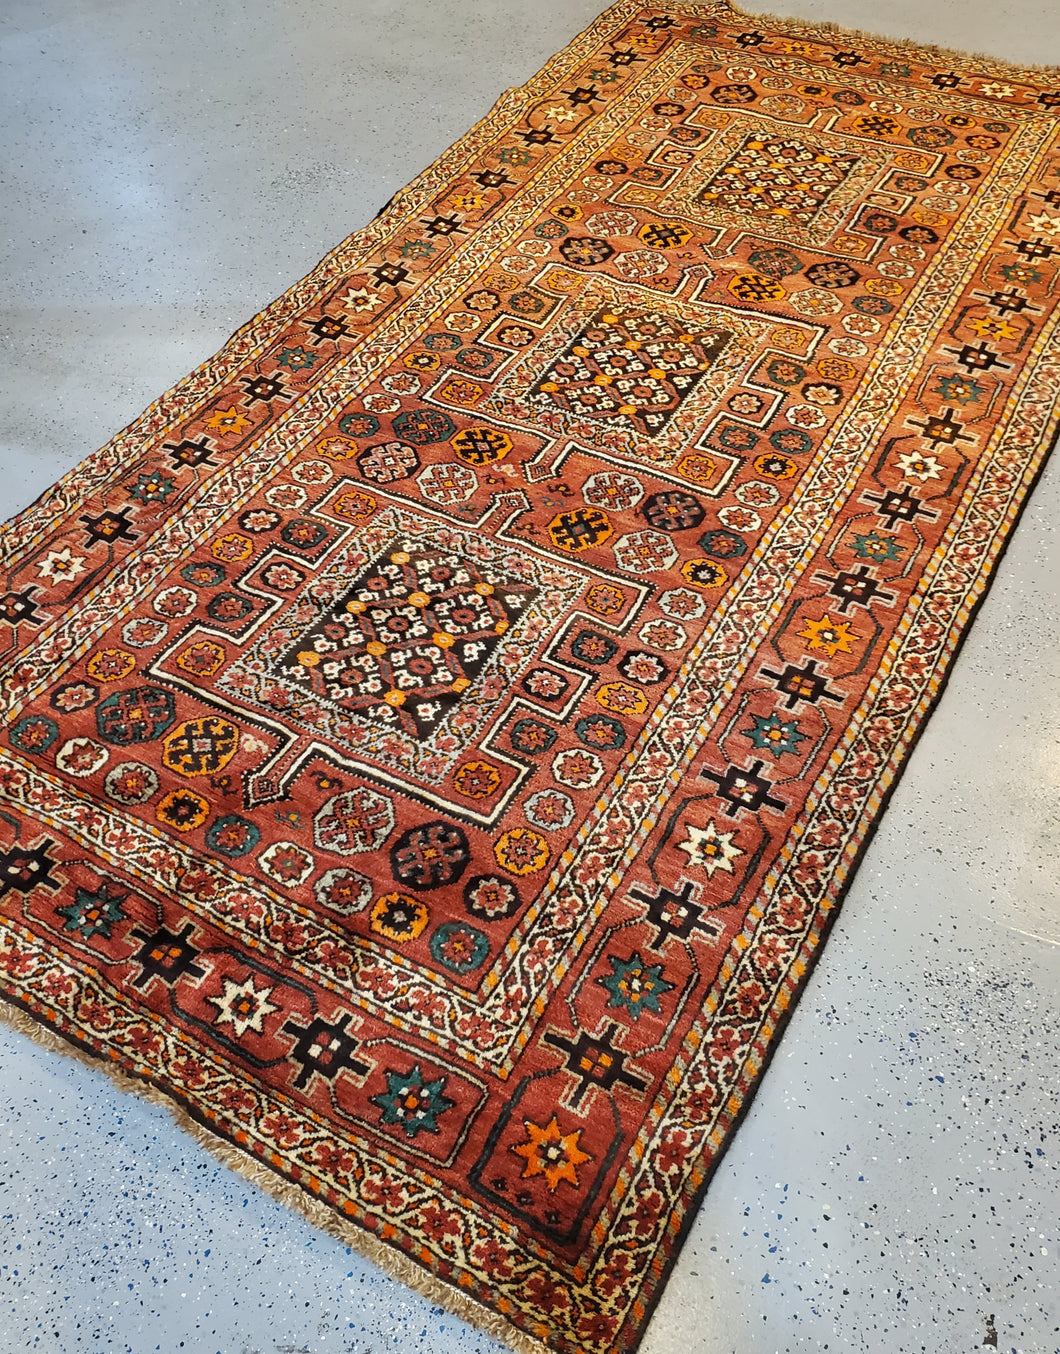 This is a top left side angled view of the Qashqai HandKnotted Area Rug